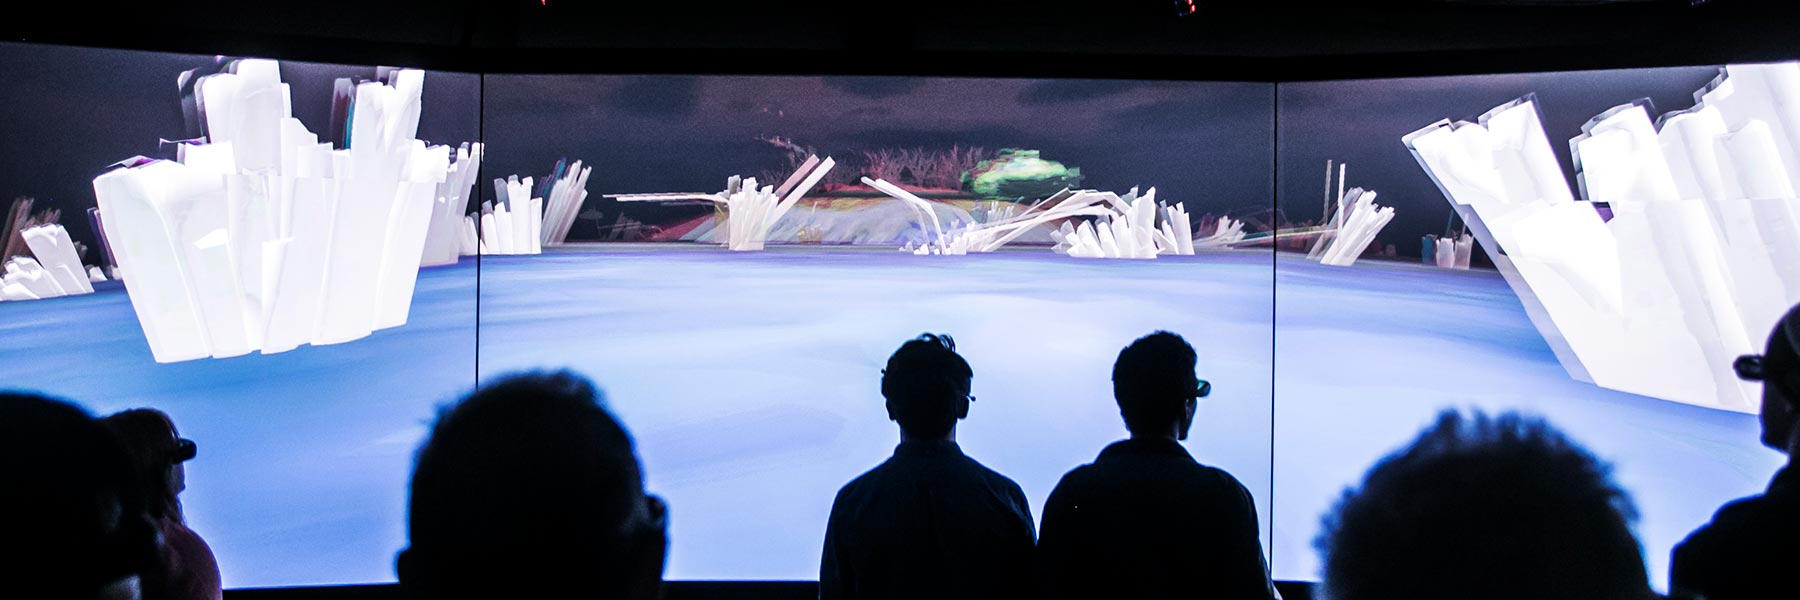 People are silhouetted as they look at 3D imagery on a virtual reality wall.